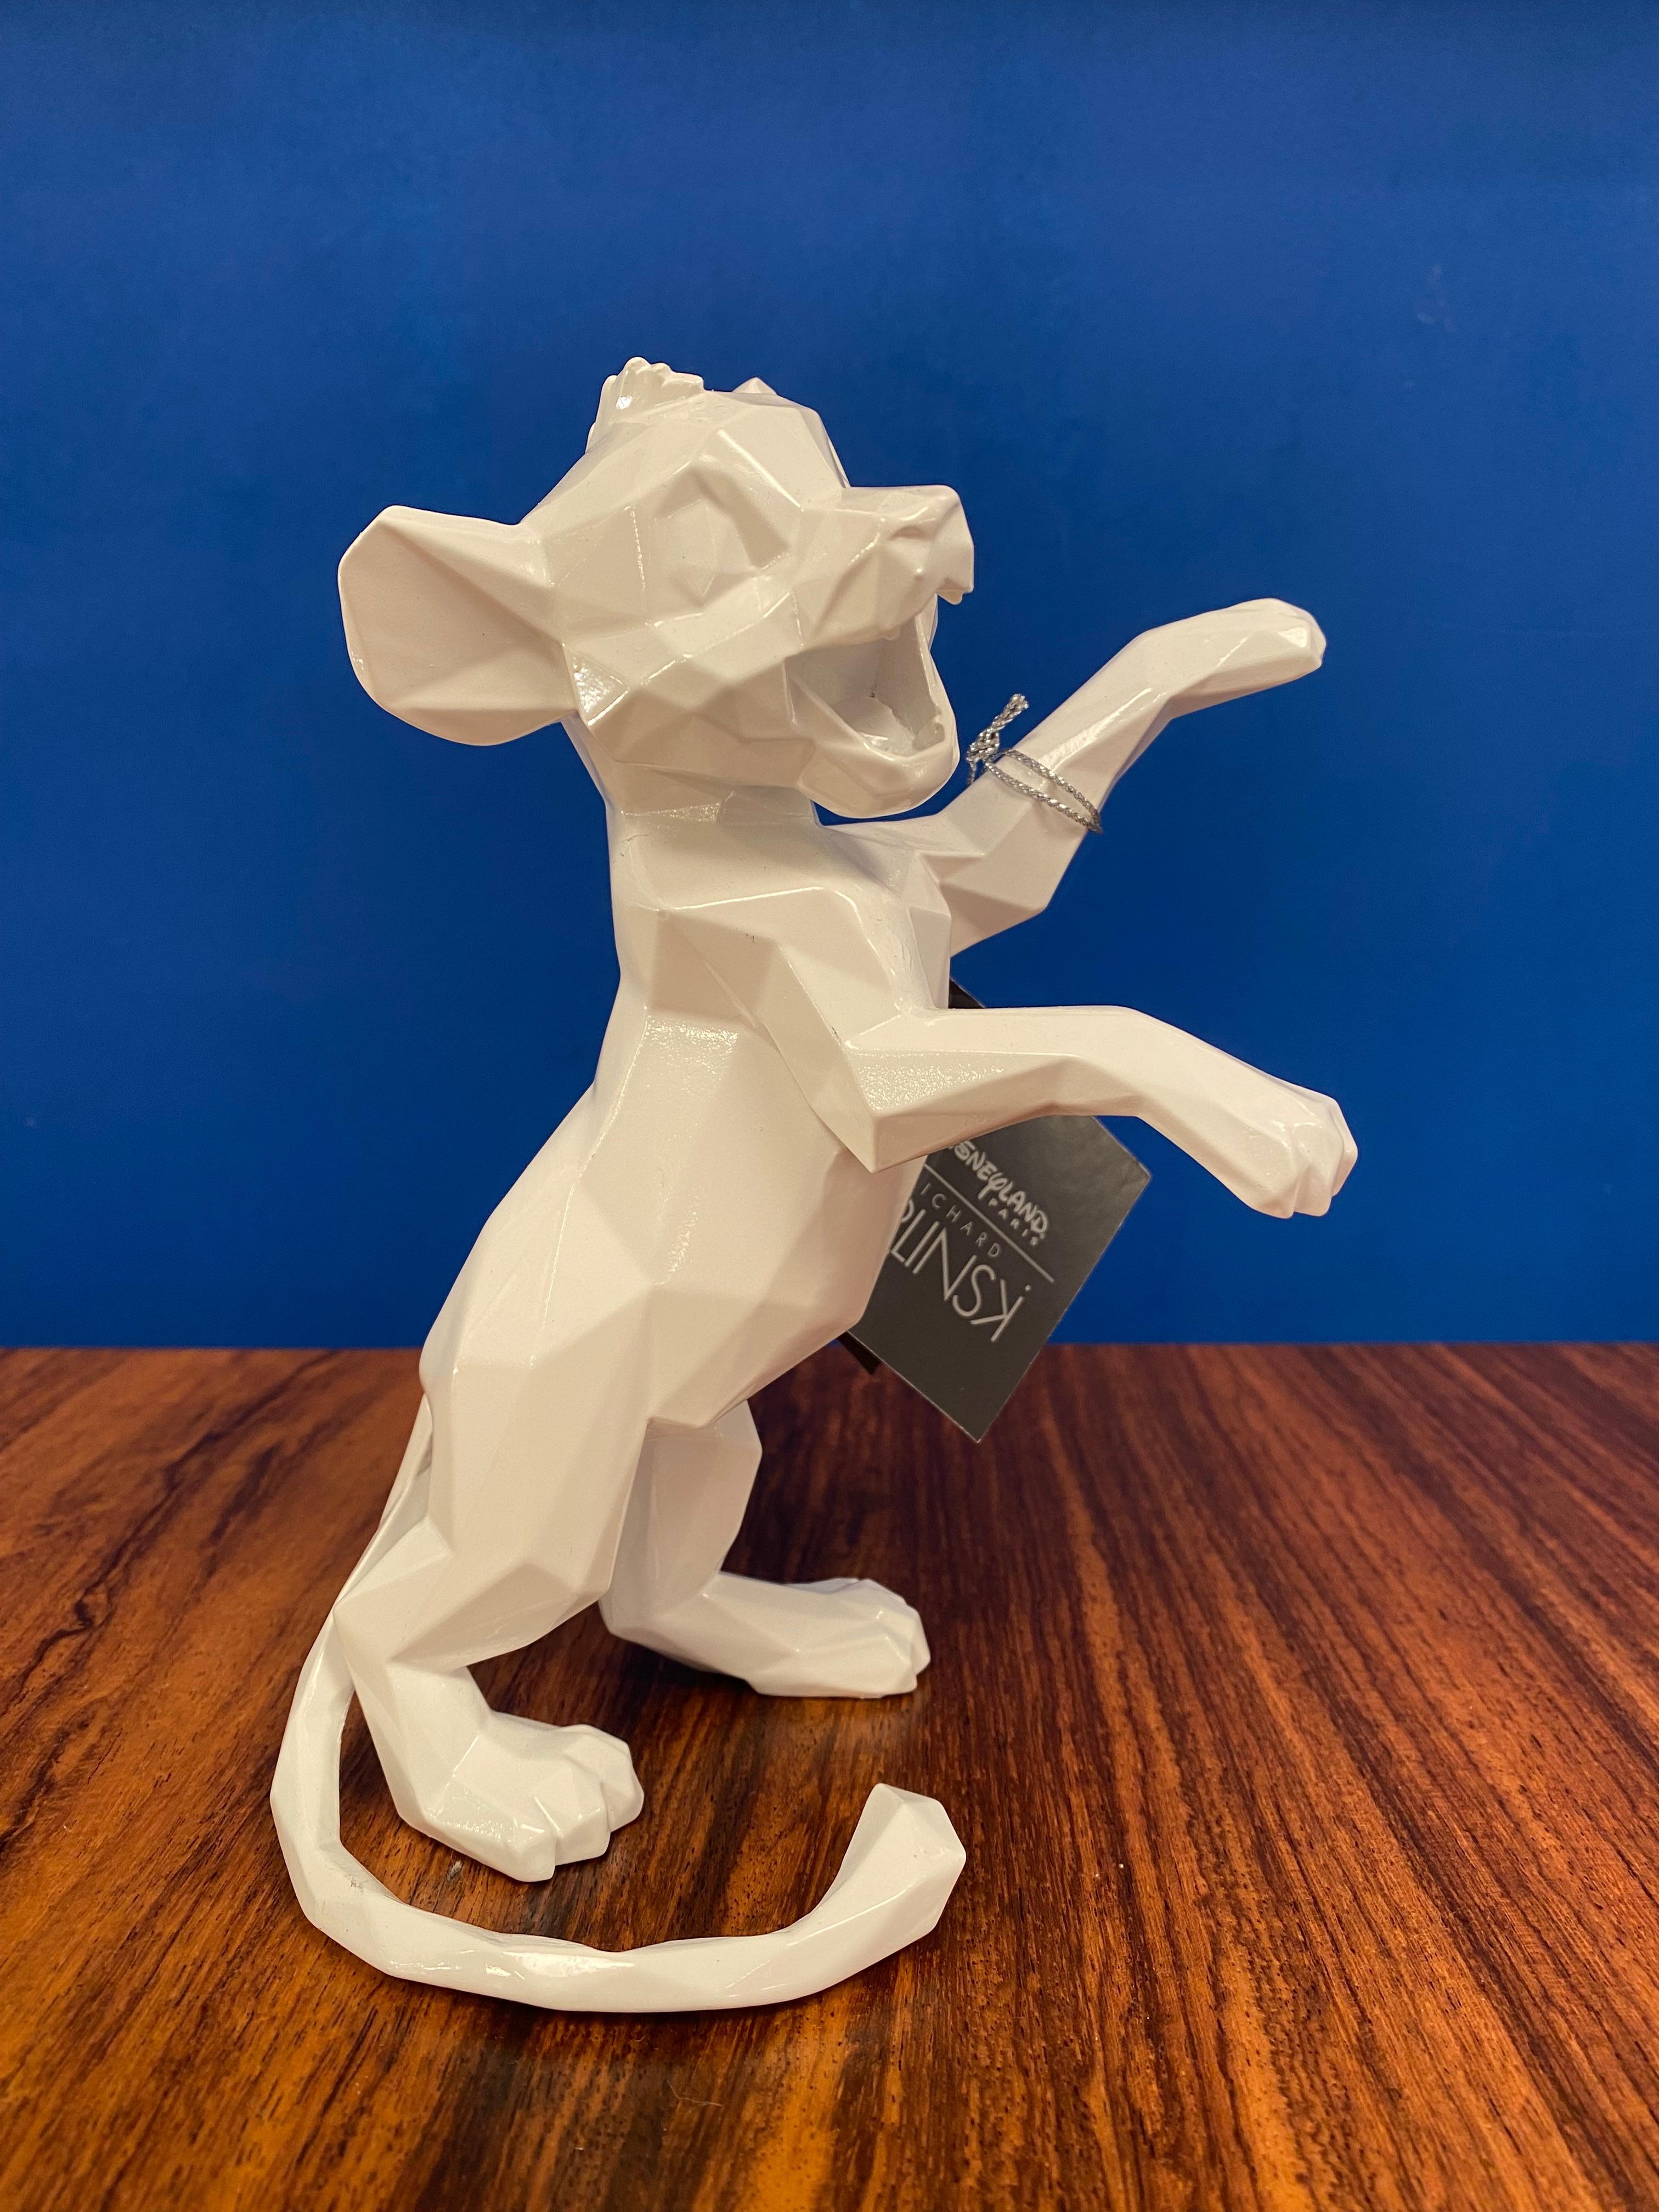 Richard Orlinski - Signed sculpture 
Simba - The Lion King - Disneyland 
Out of print edition
Dimensions : h18xw10xL10cm
Price : 490€ for this sculpture